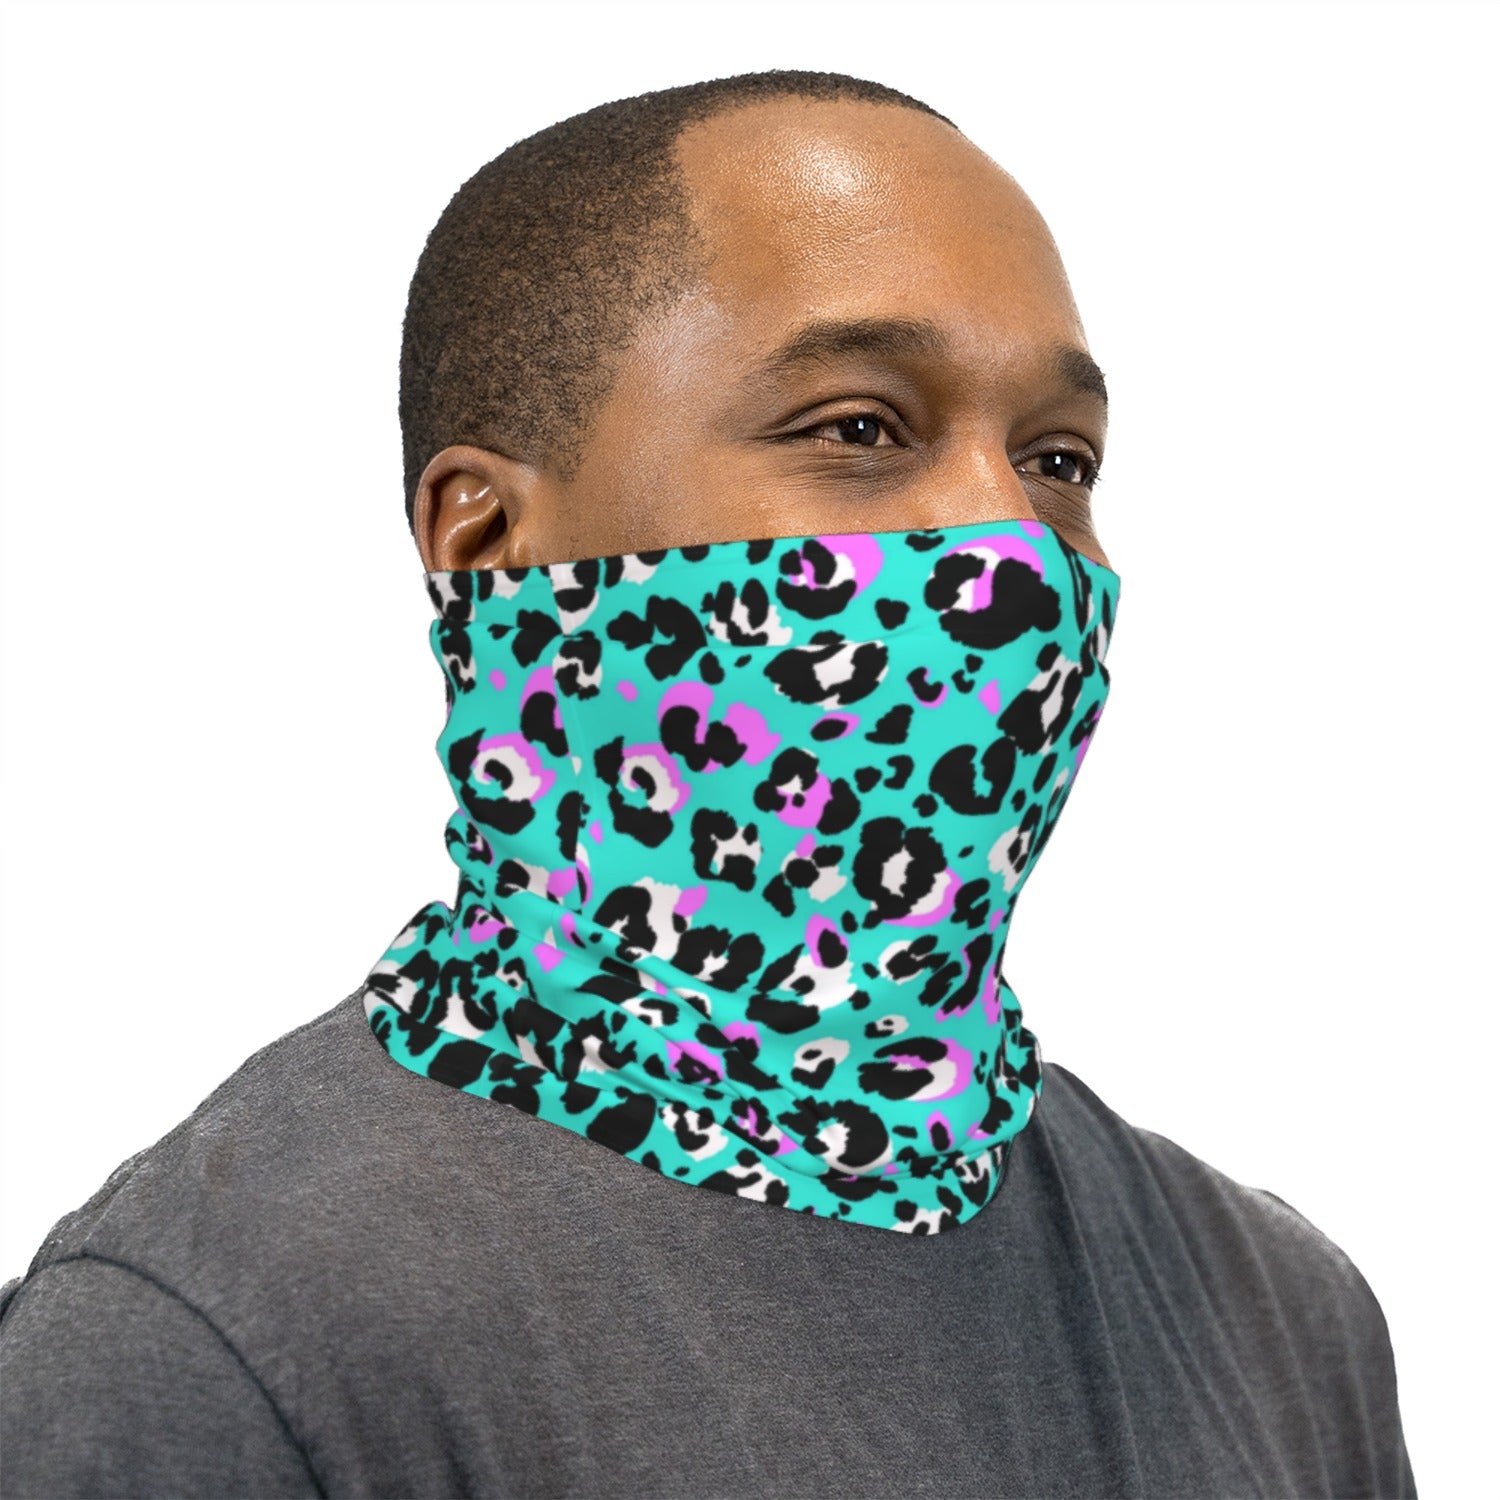 Turquoise Black and Pink Leopard Print Neck Gaiter Face Mask